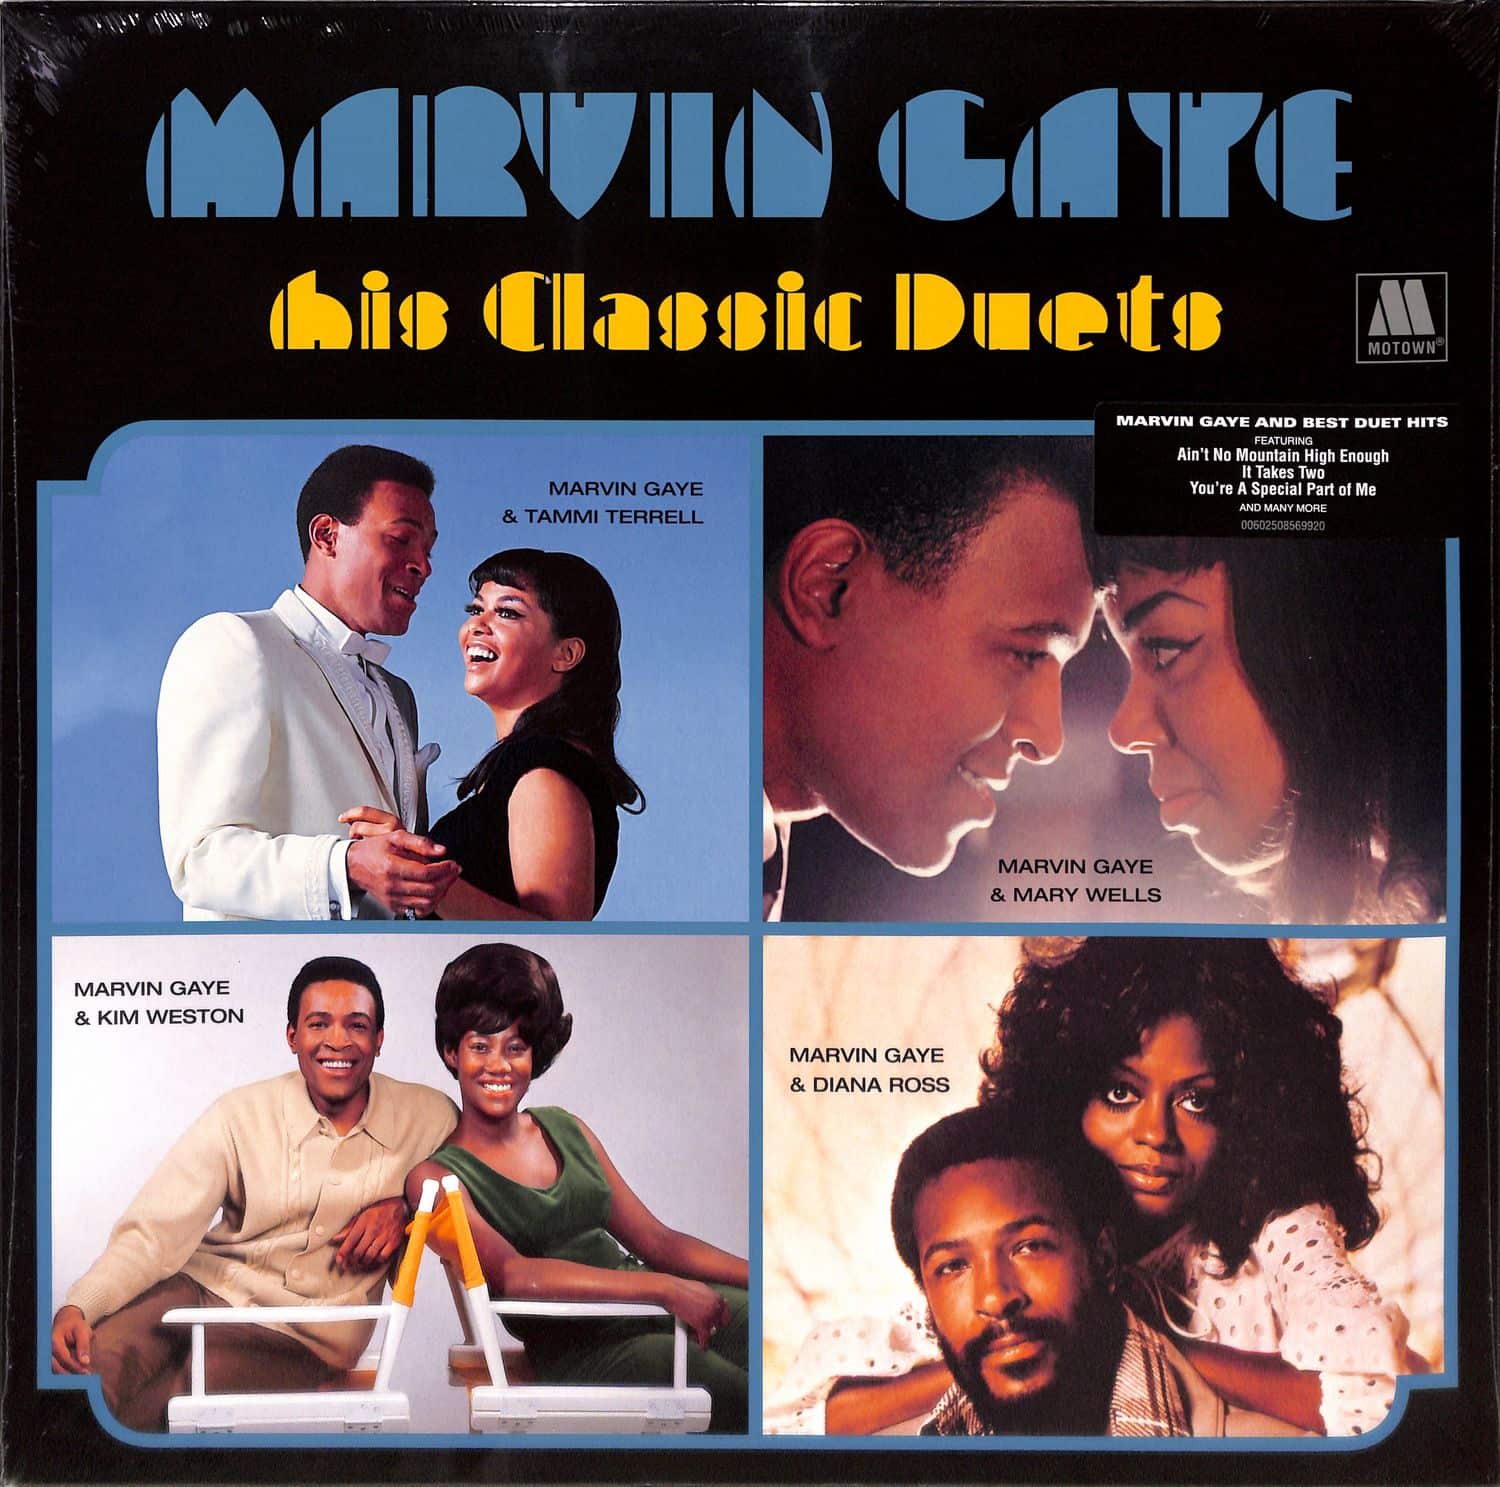 Marvin Gaye - HIS CLASSIC DUETS 